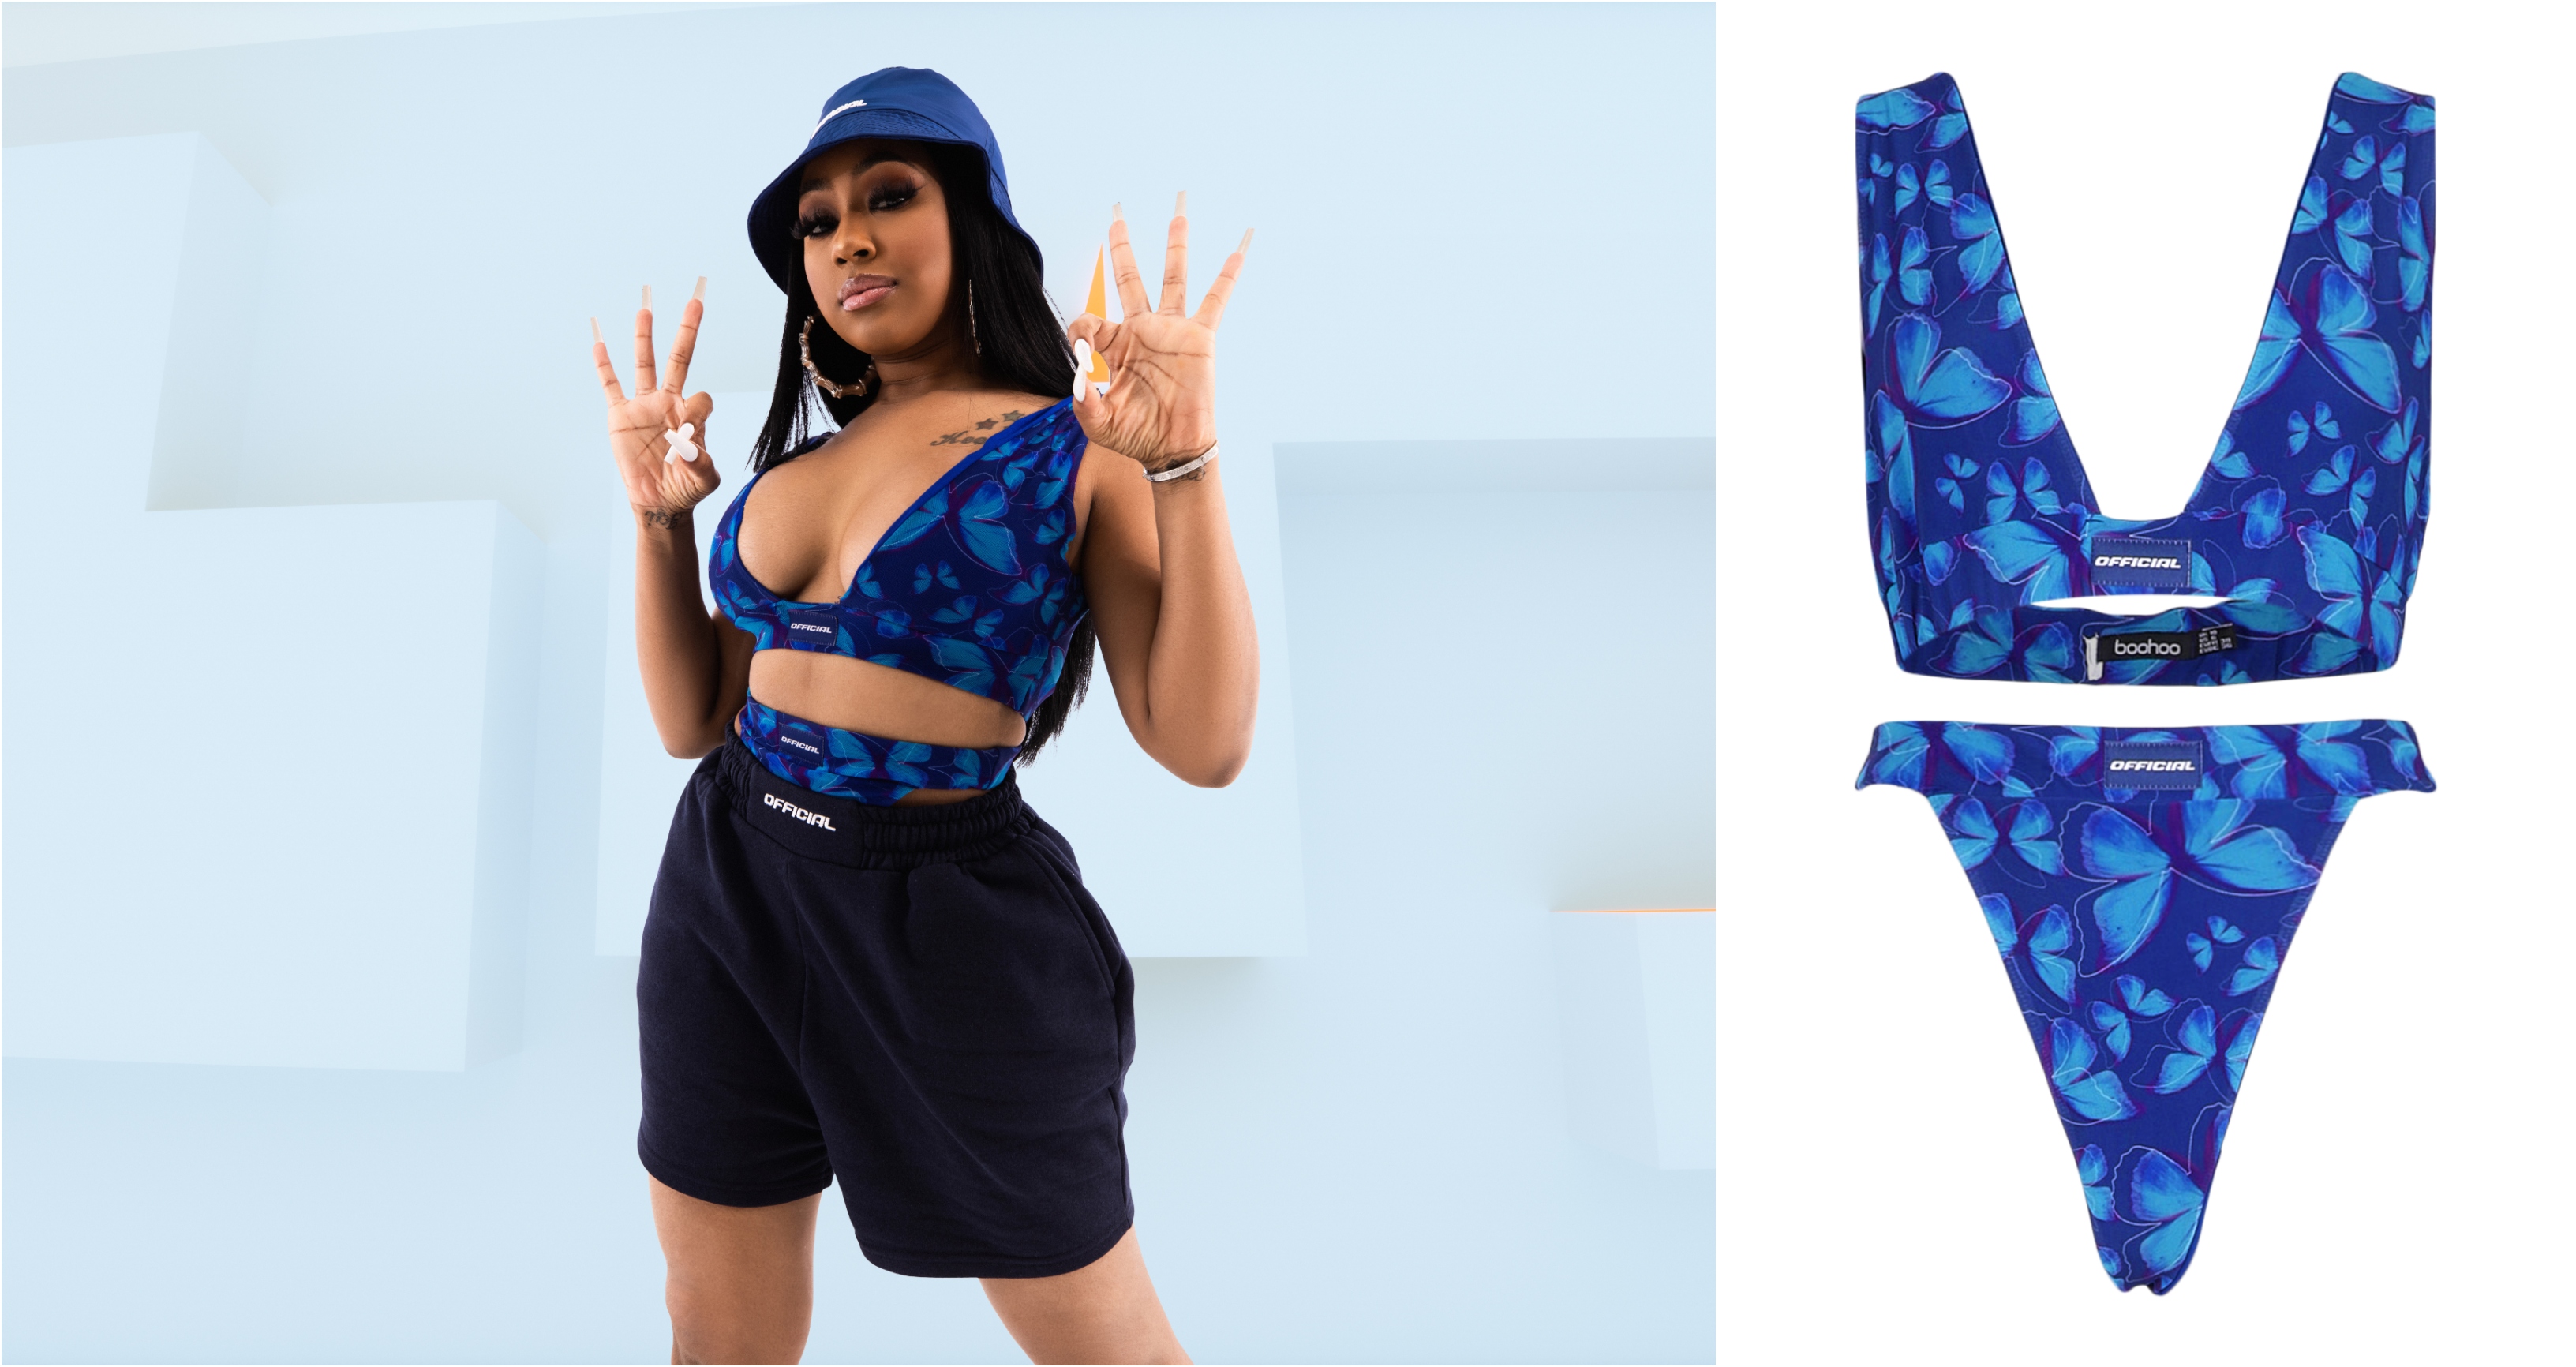 låne aflevere Bror 5 Must-Have Pieces From The Boohoo X City Girls Collection